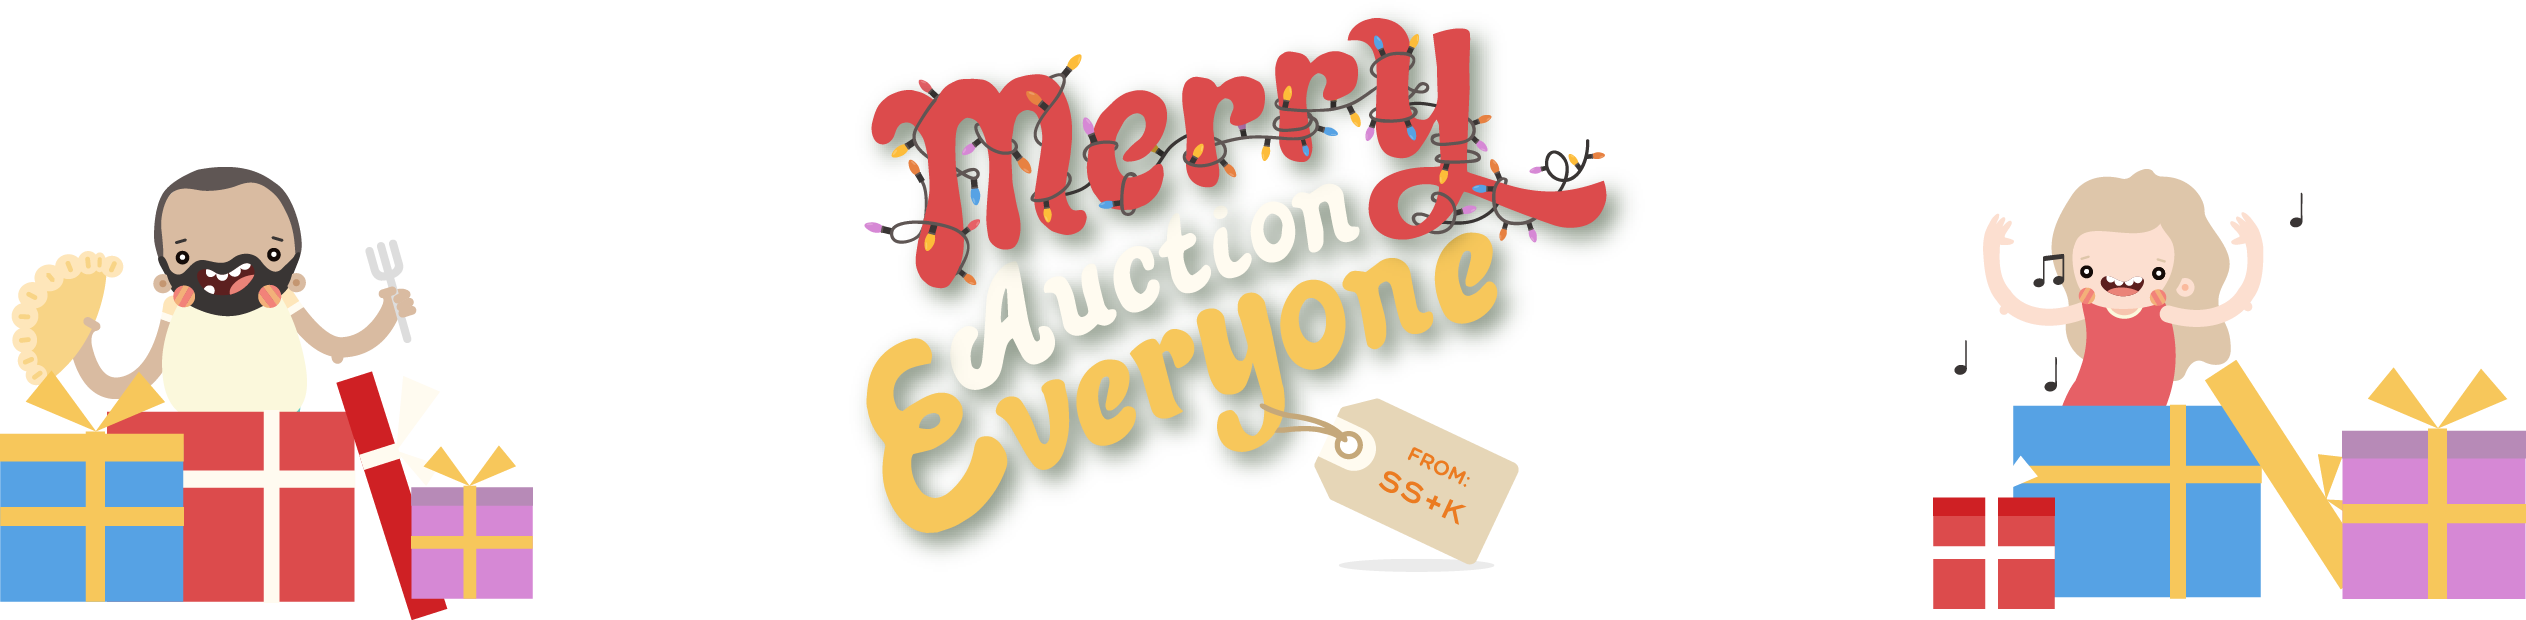 SS+K's Merry Auction, Everyone!